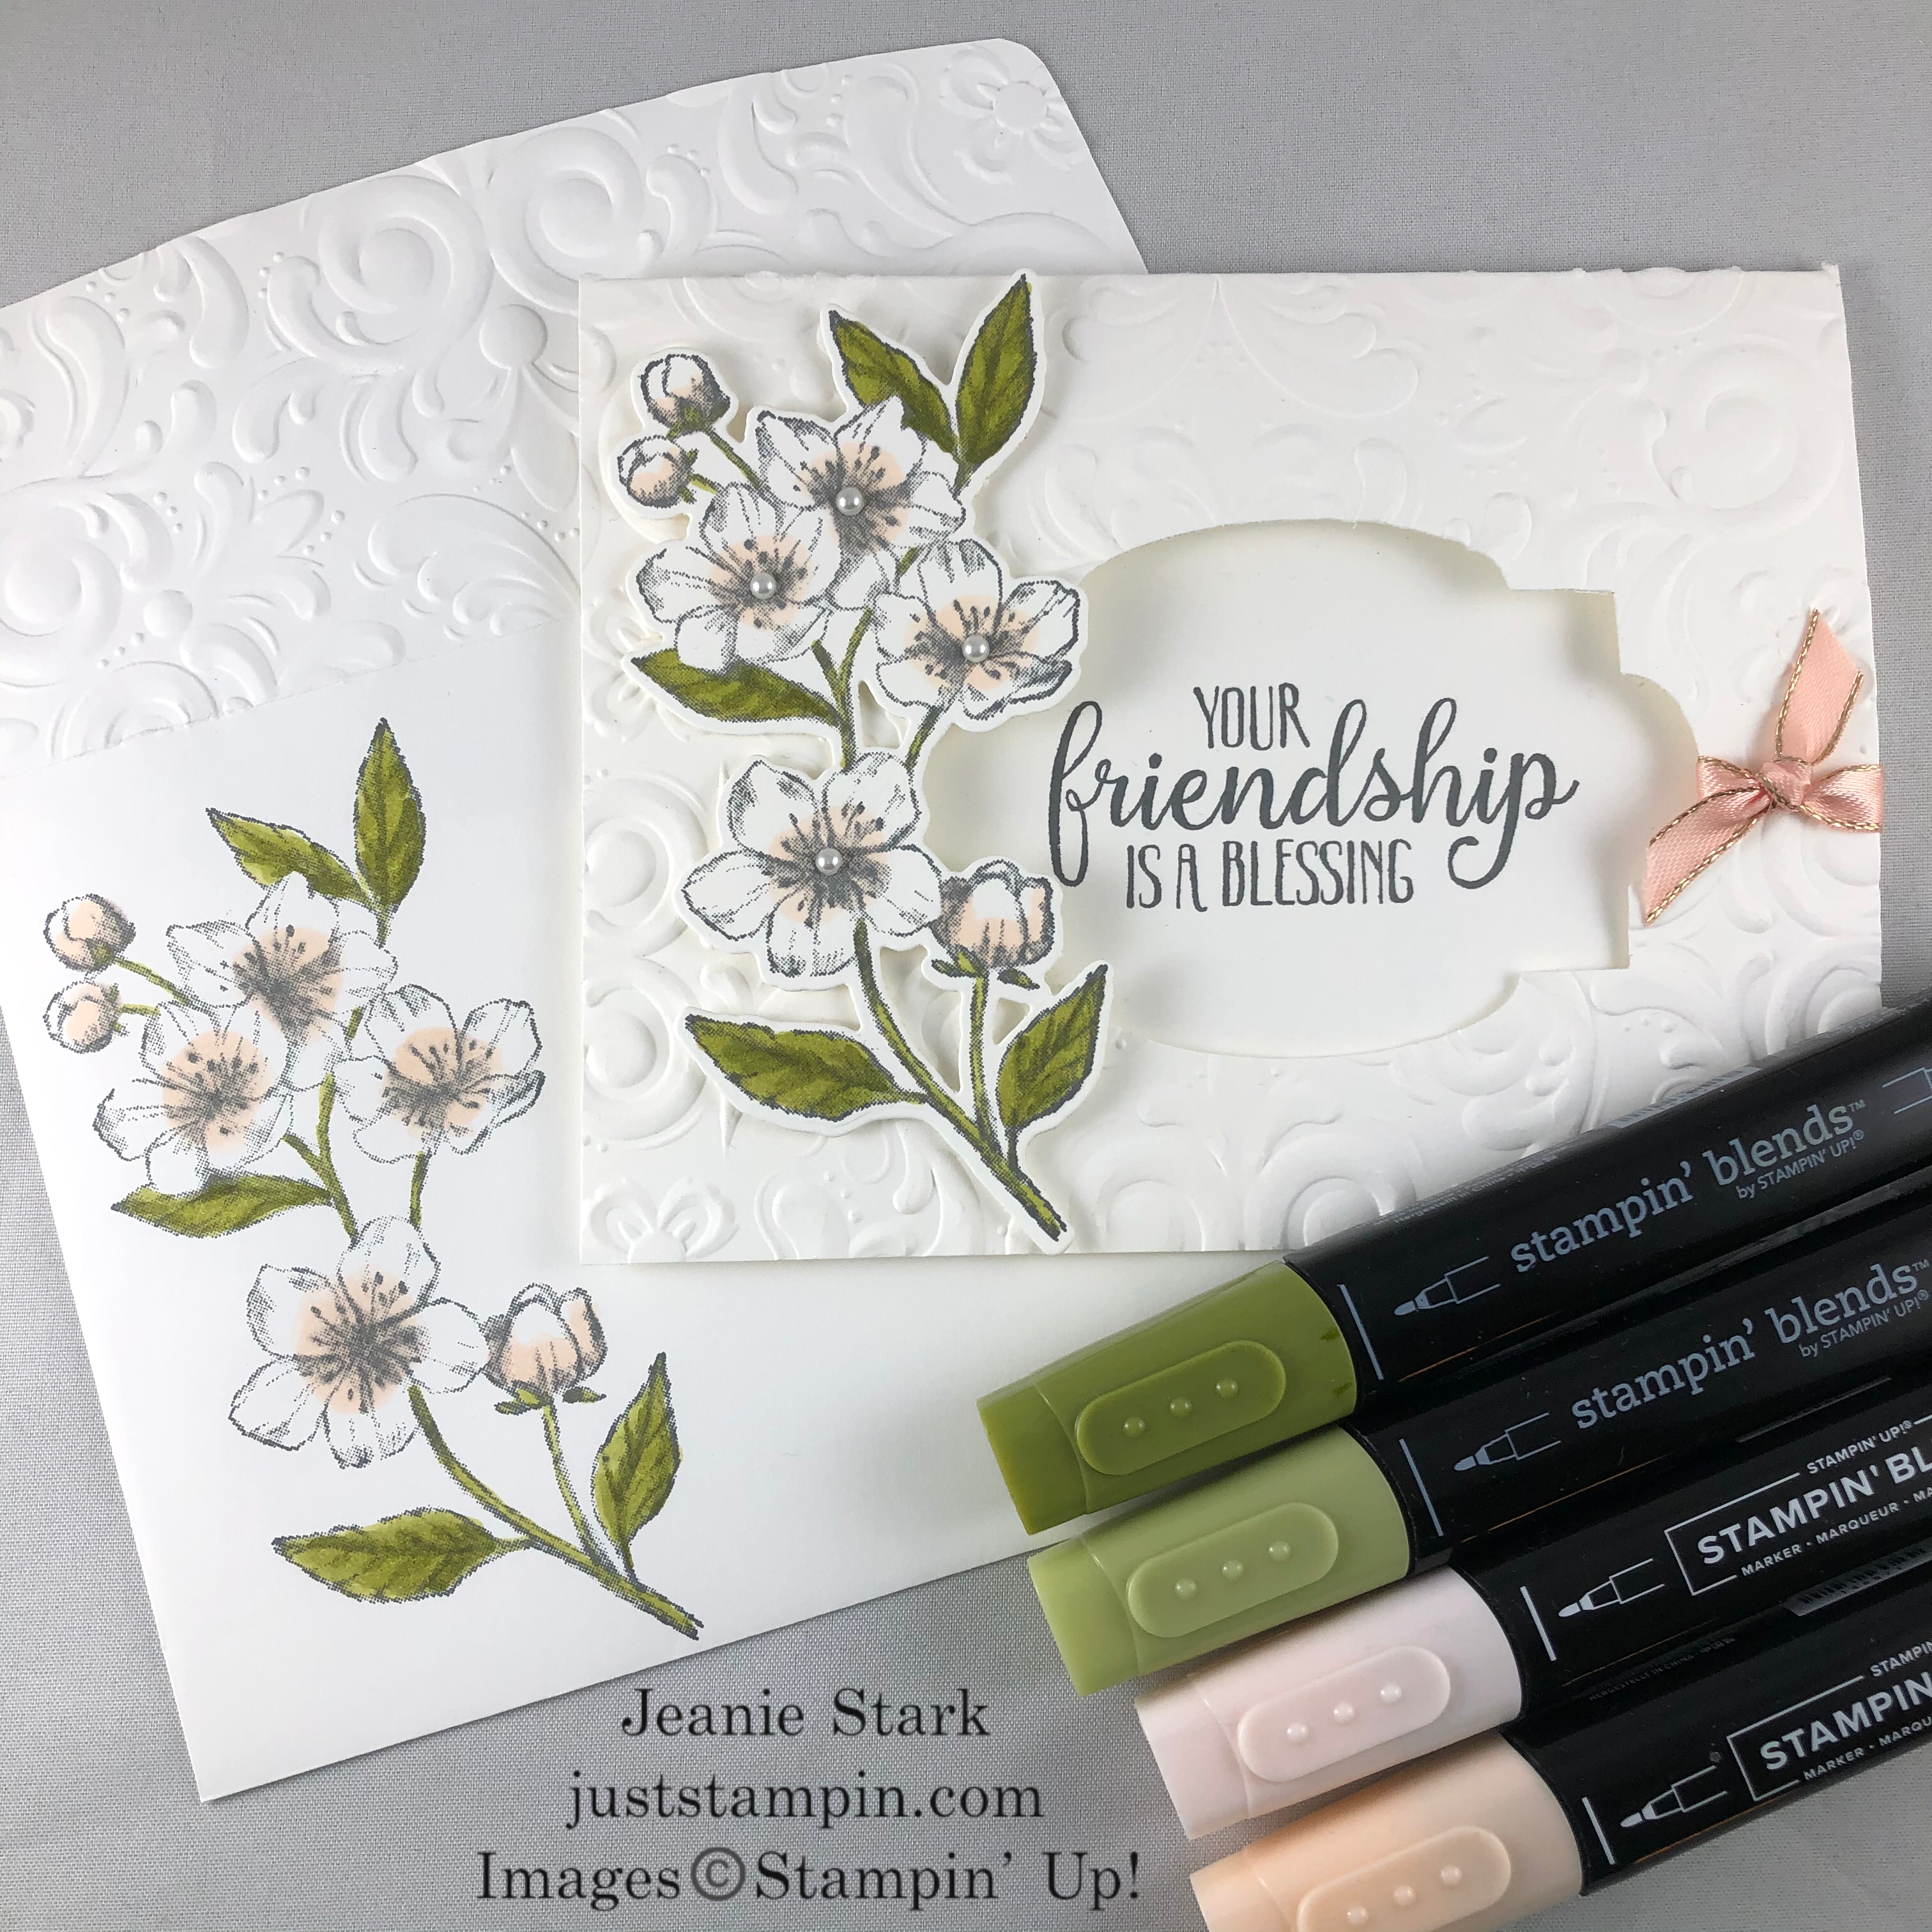 Stampin Up Forever Blossoms and So Sentimental friend card idea - Jeanie Stark StampinUp